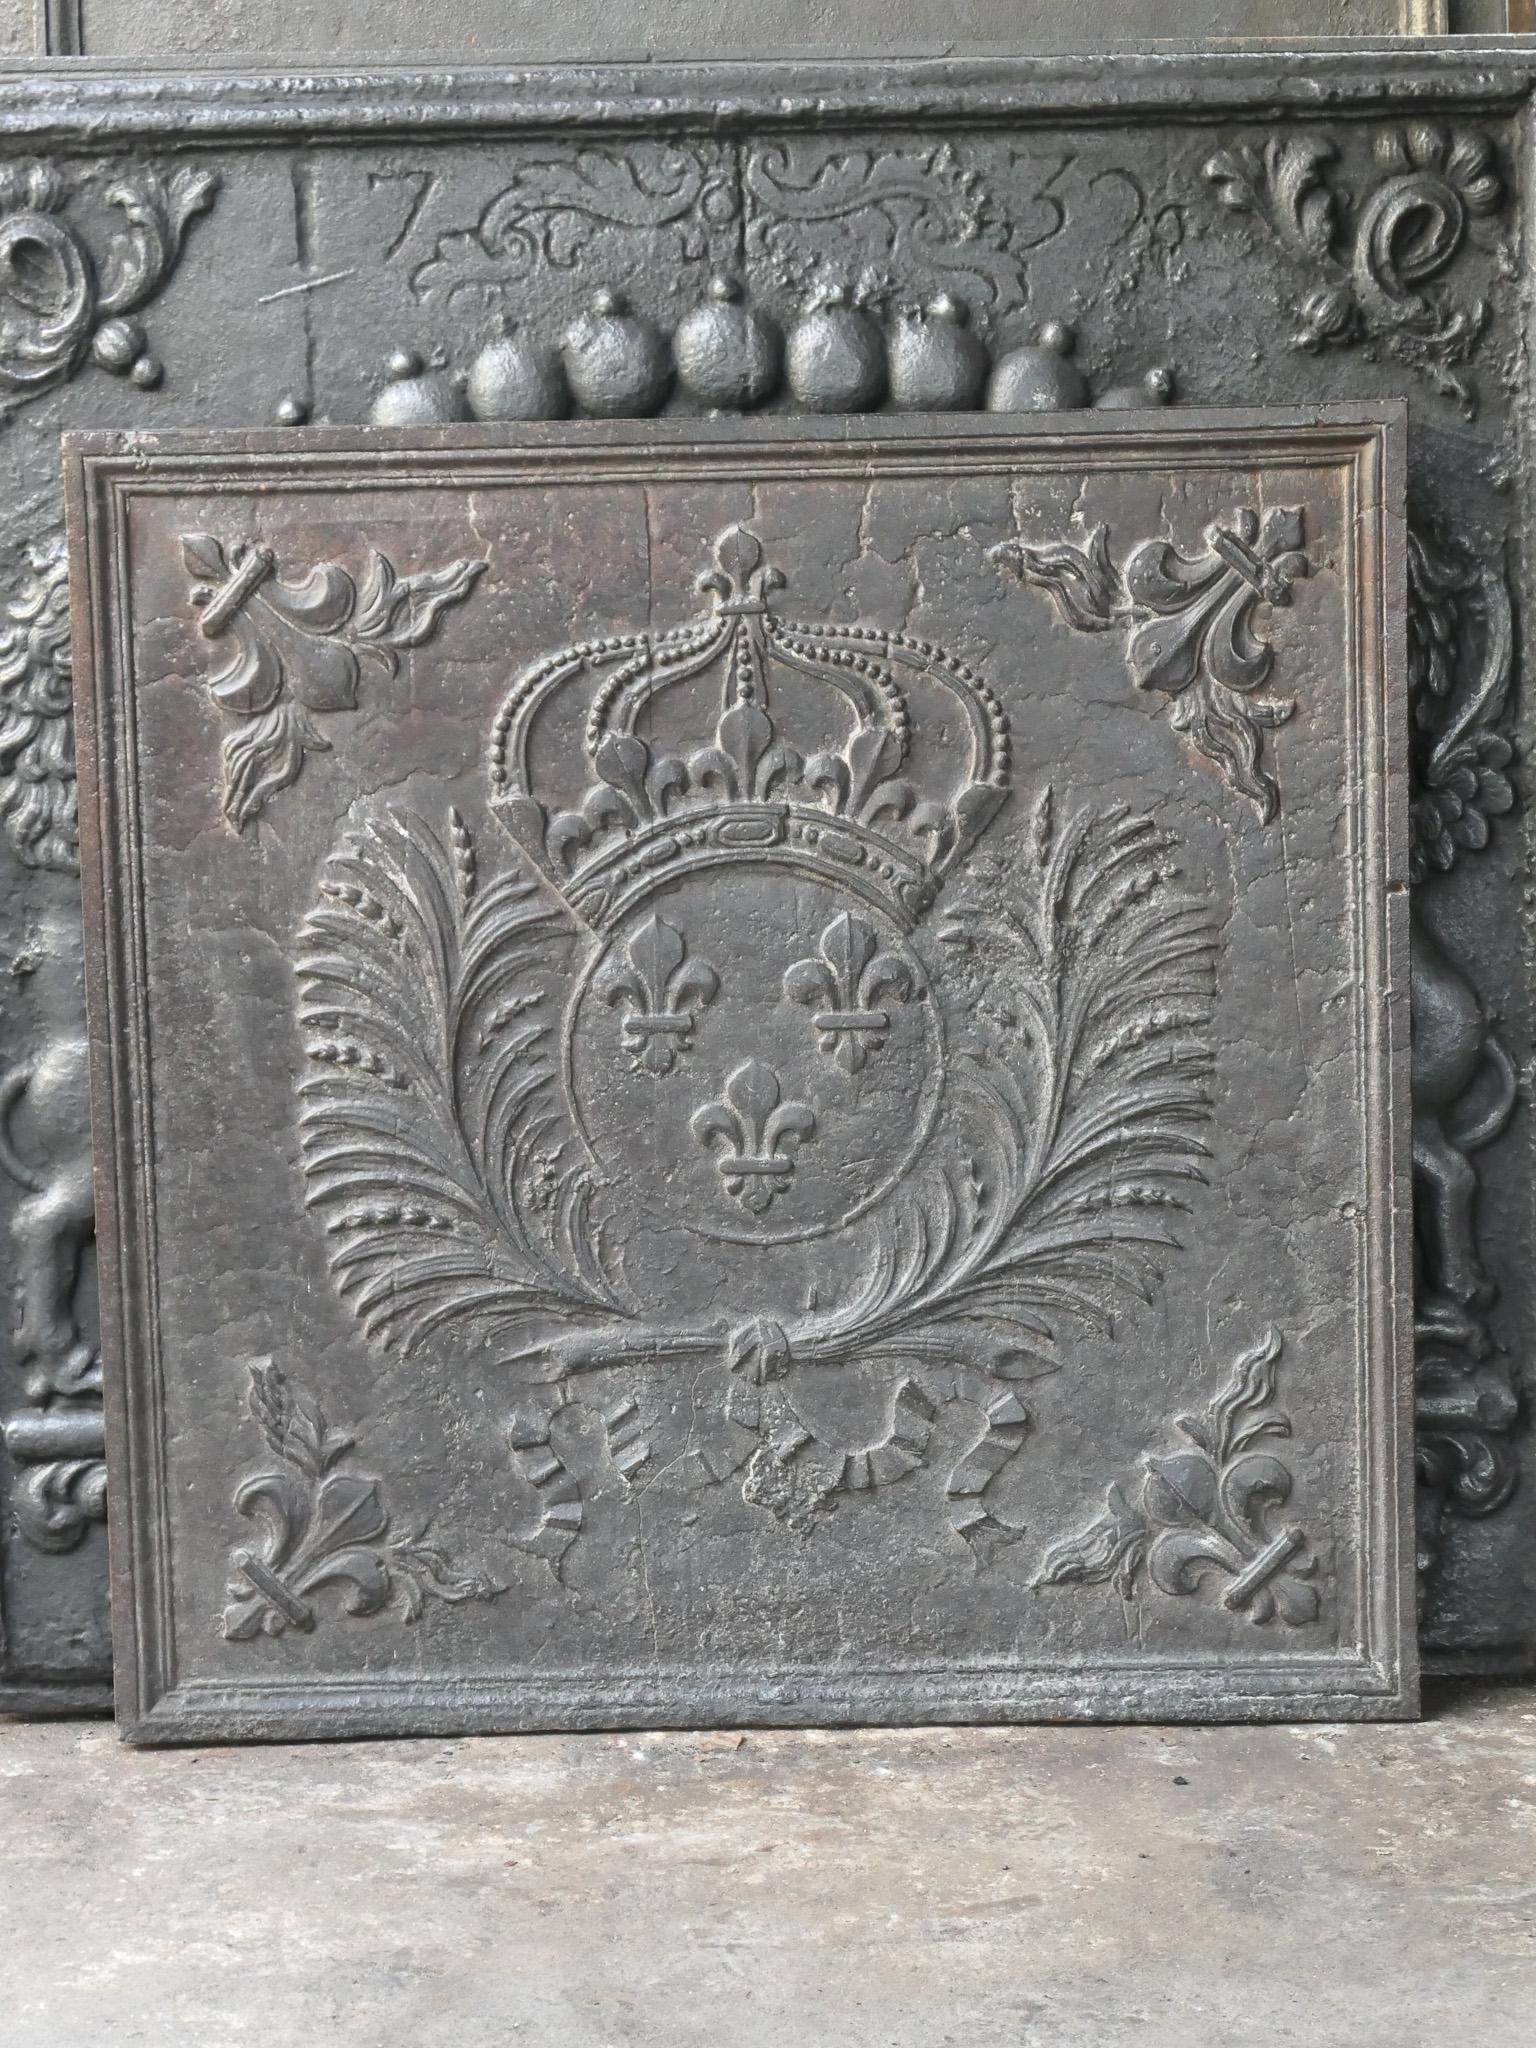 17th - 18th century French Louis XIV period fireback with the Arms of France, dated 1705. A coat of arms of the House of Bourbon, an originally French royal house that became a major dynasty in Europe. The house delivered kings for Spain (Navarra),